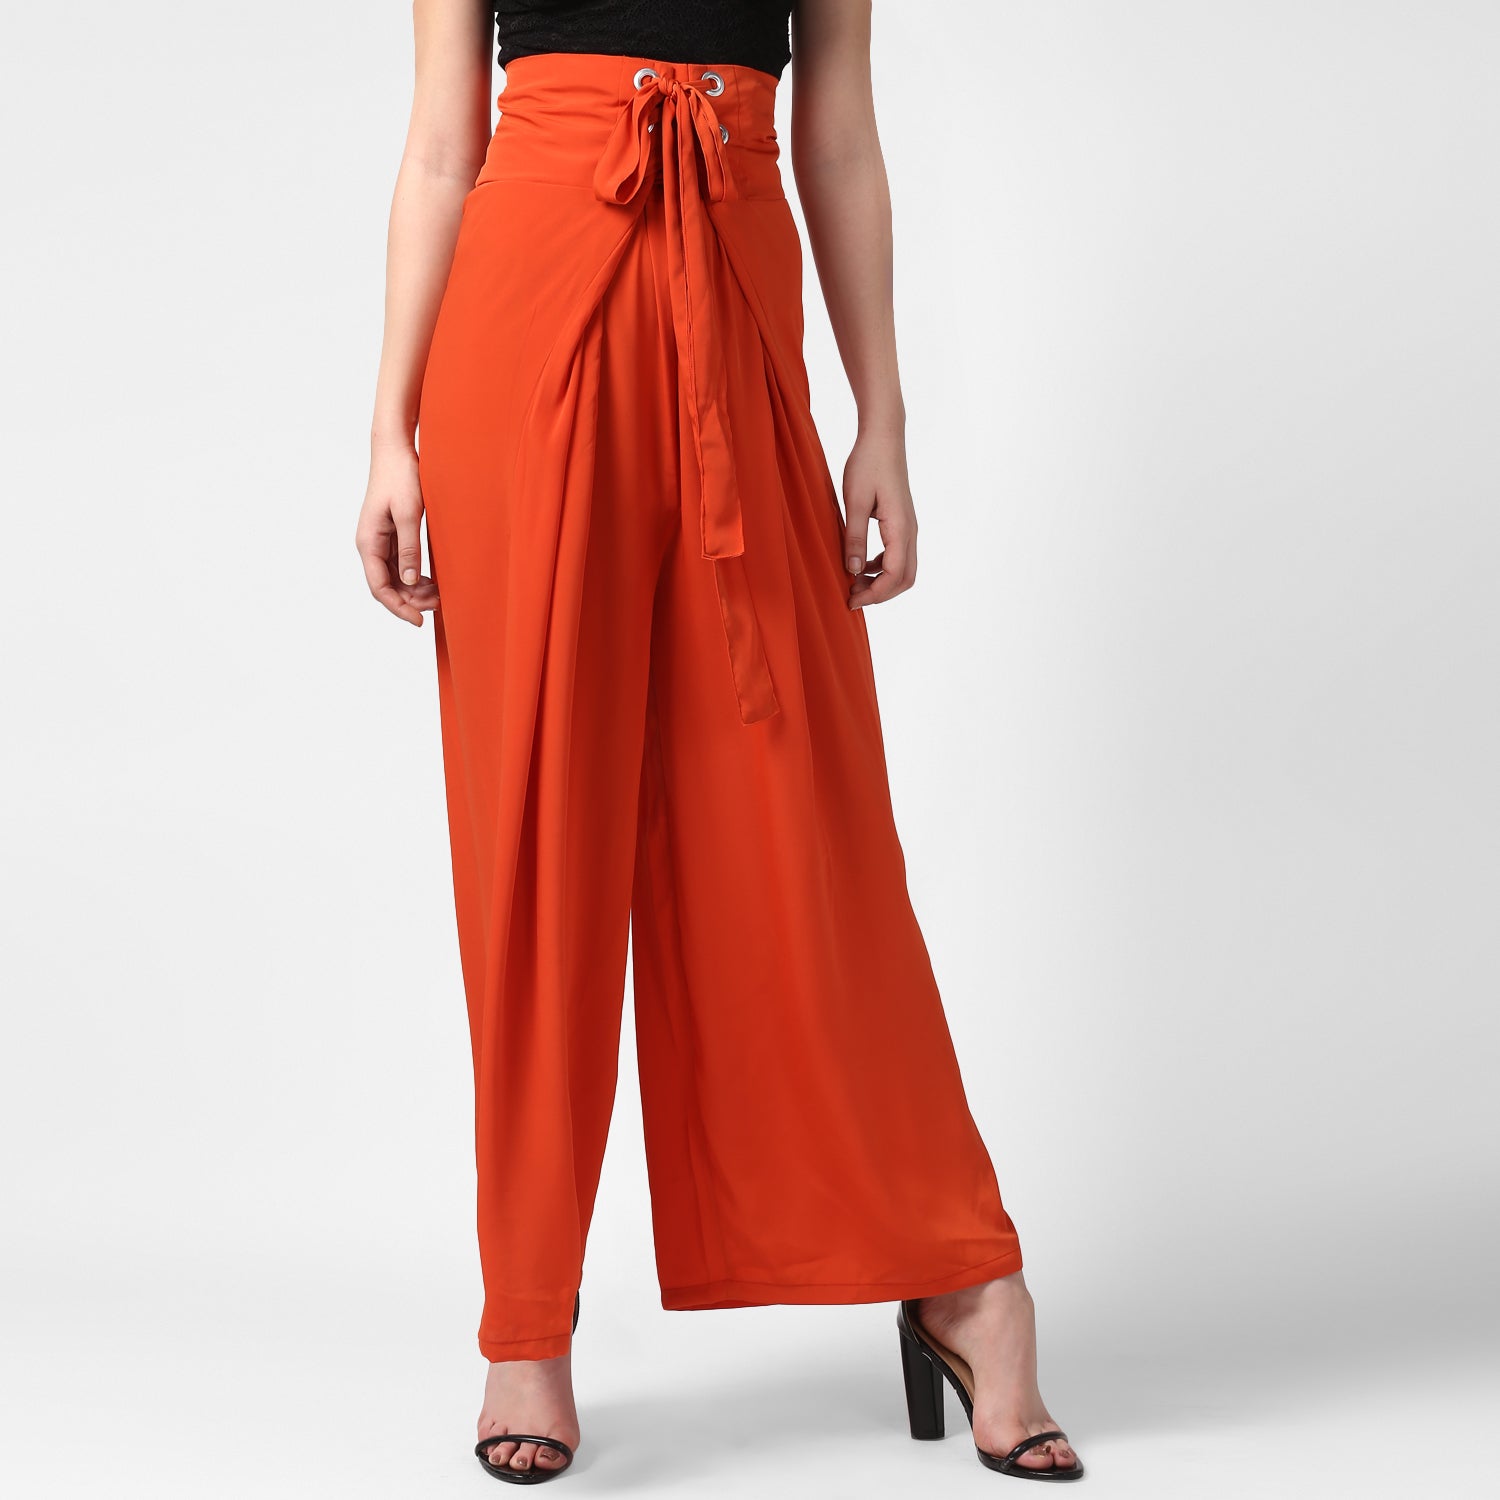 Women's Orange Polyester High Waisted Palazzo with front Rivets and Back Elastic - StyleStone